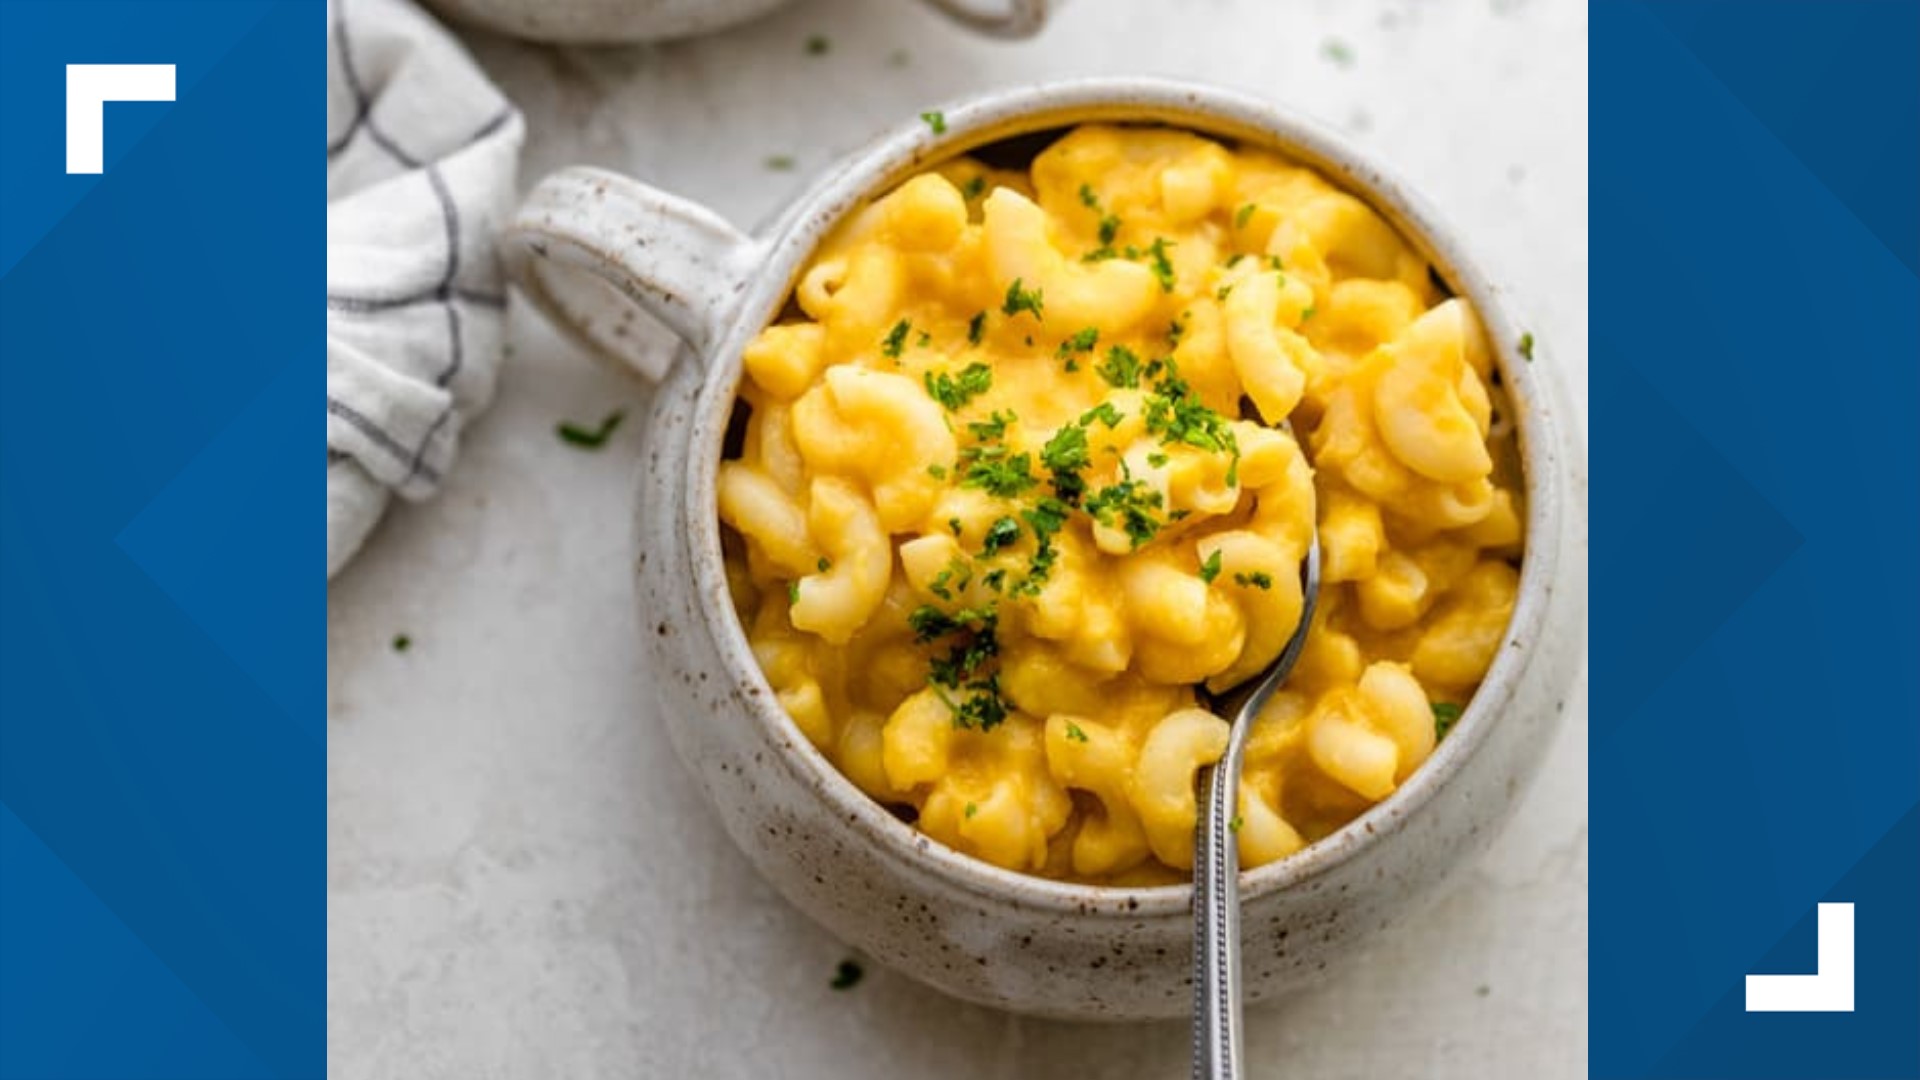 The Feel Good Foodie shares a new way to serve up Mac & Cheese.